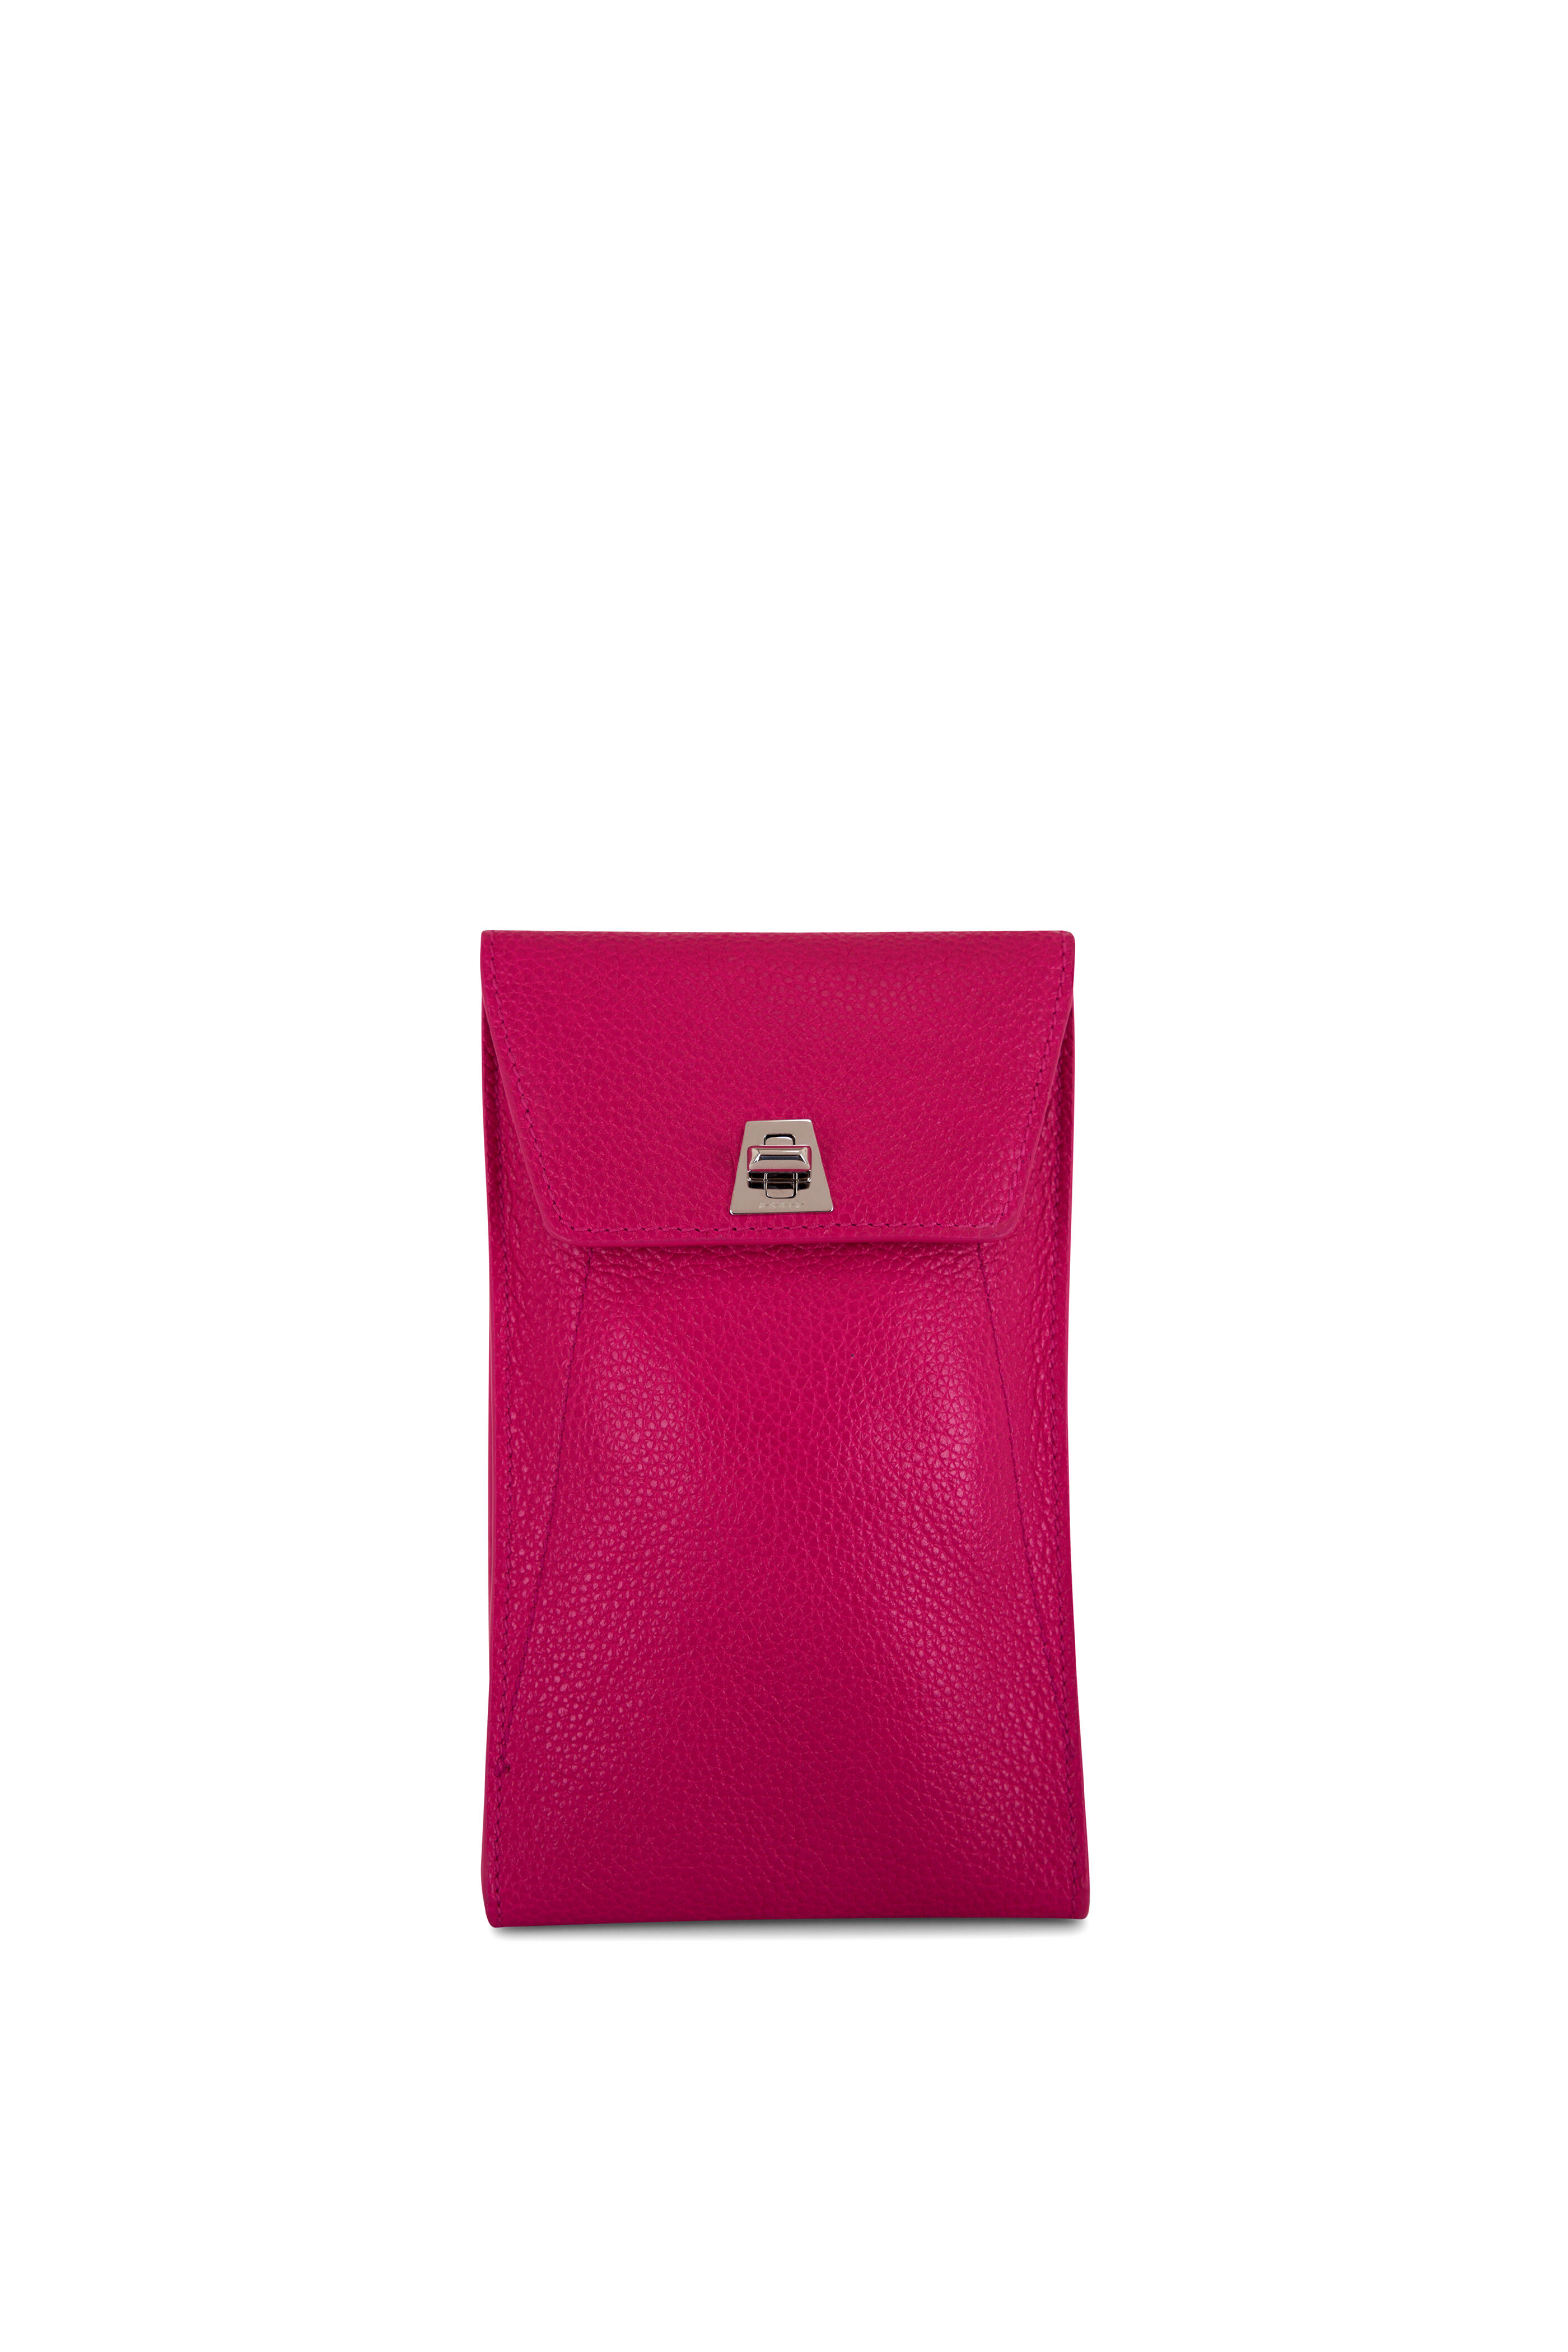 Akris - Anouk Pink Grained Leather Phone Pouch